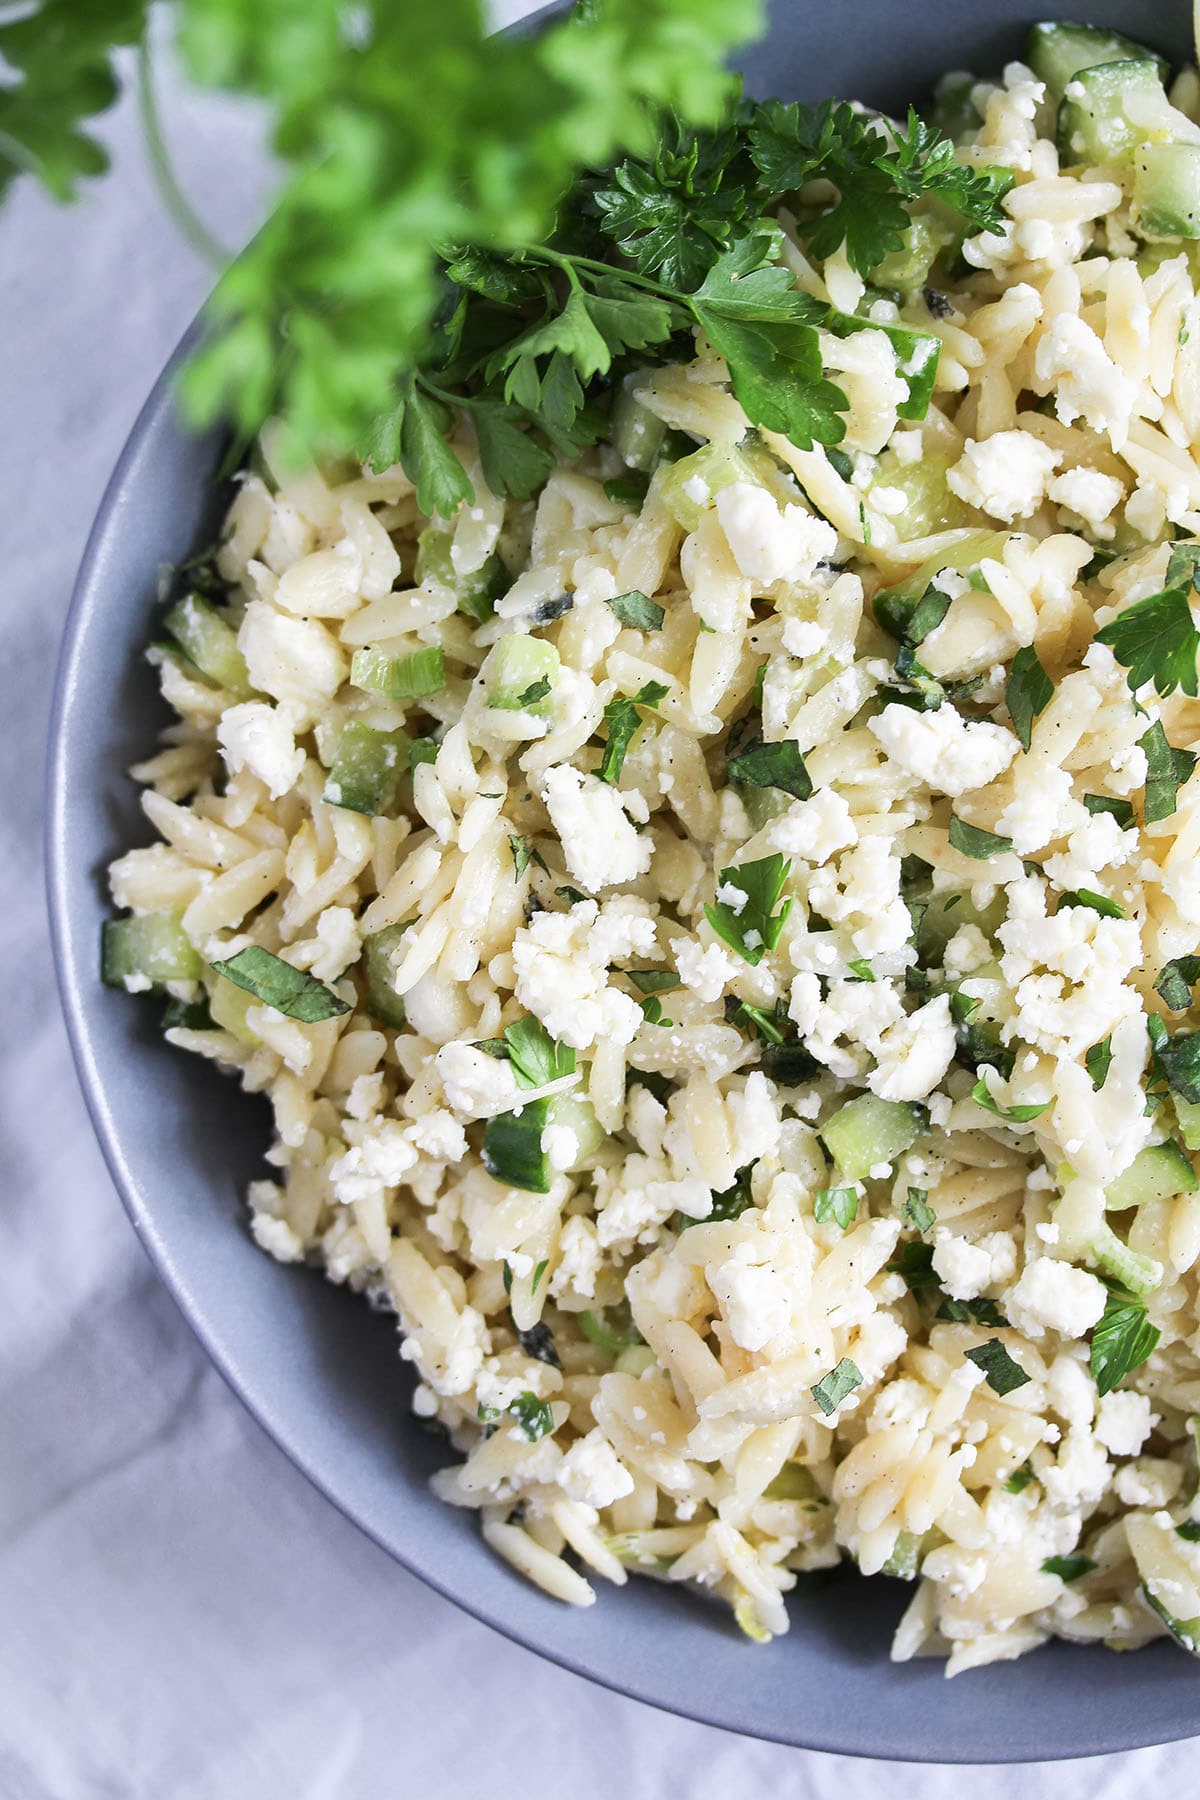 feta orzo salad with cucumbers and mint in a bowl.